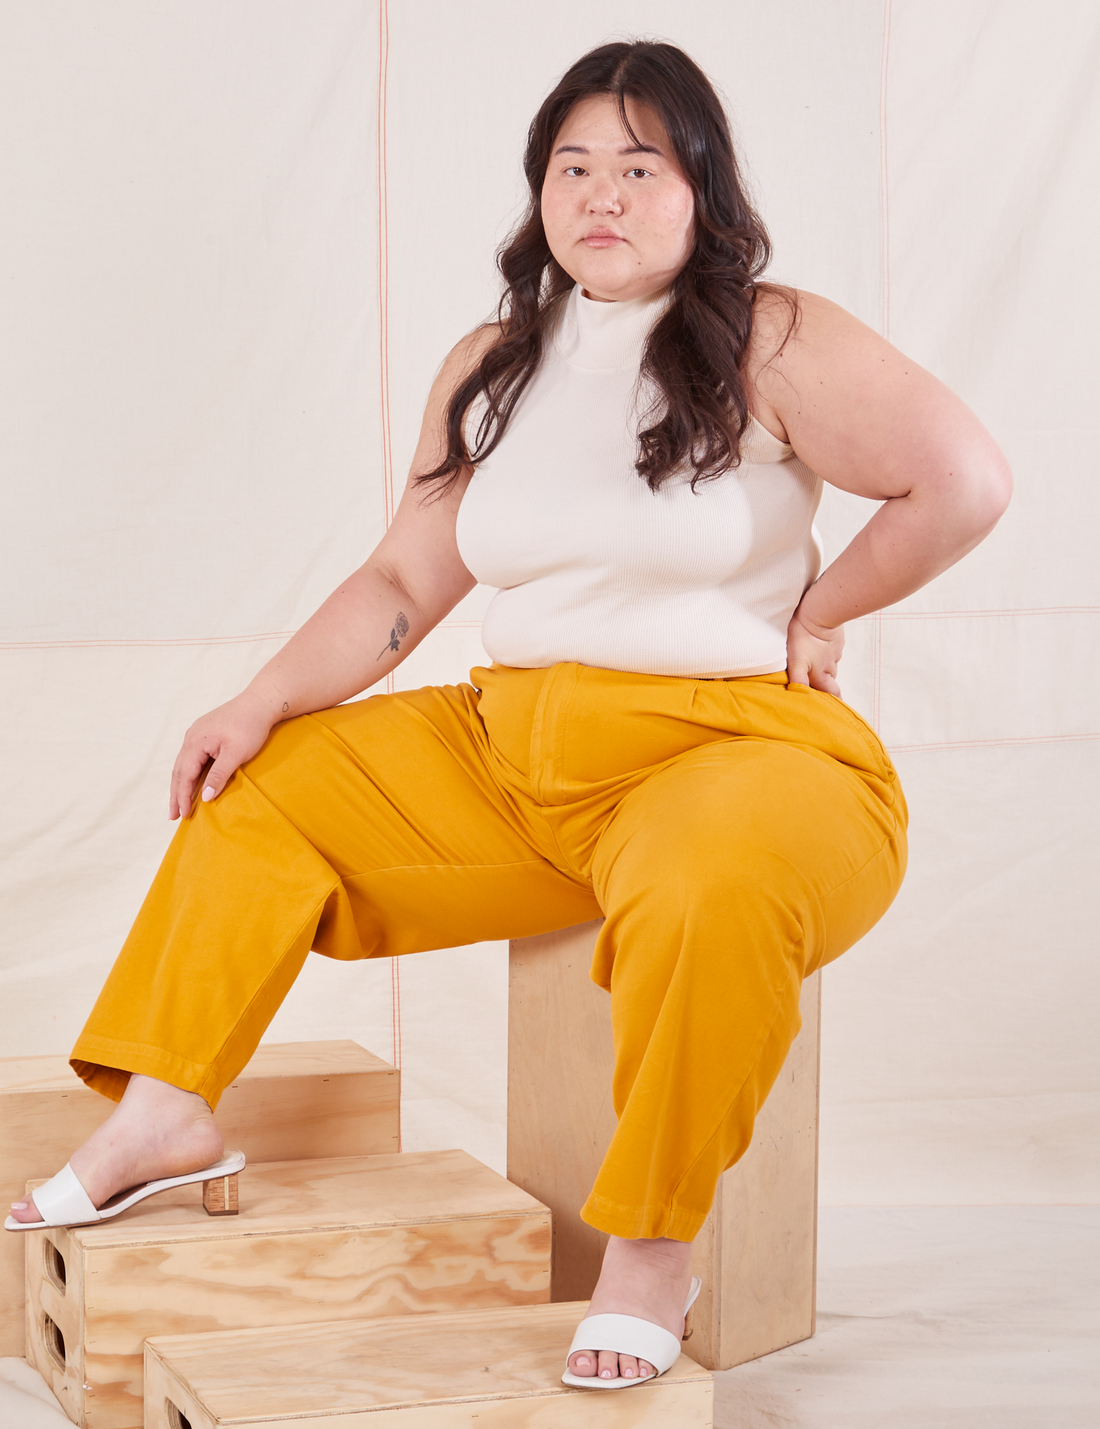 Ashley is sitting on a wooden crate wearing Organic Trousers in Mustard Yellow and vintage off-white Sleeveless Essential Turtleneck